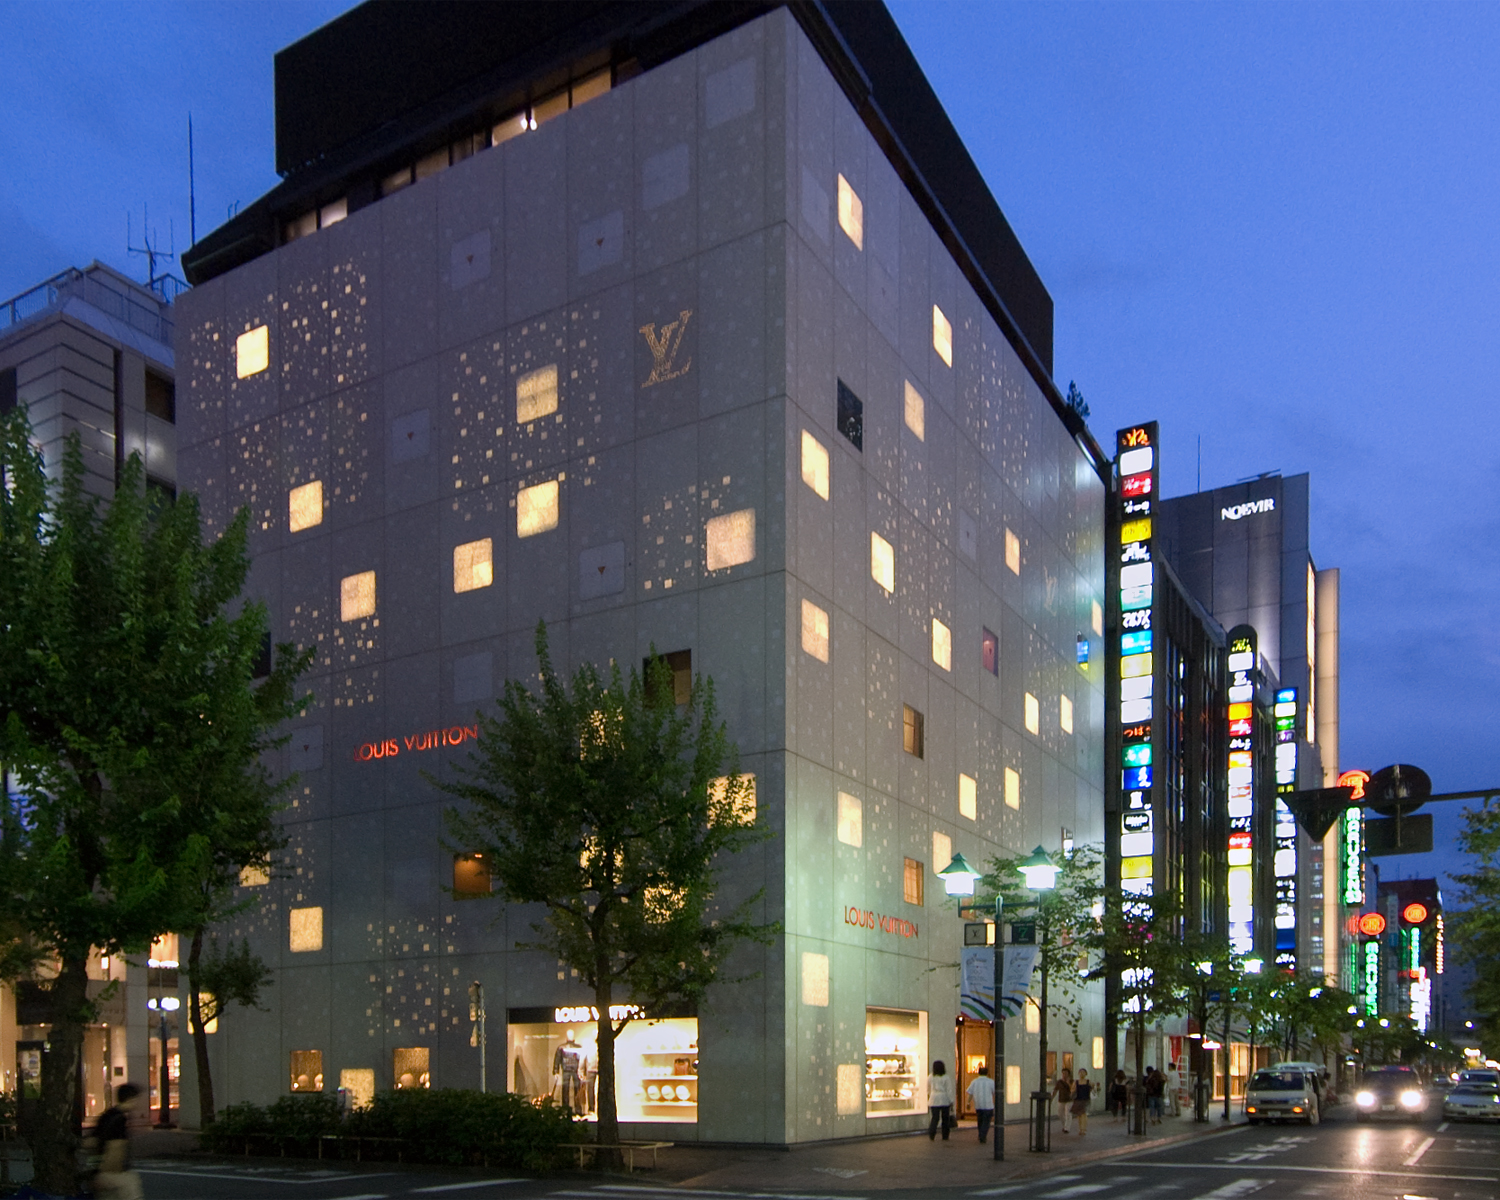 New Louis Vuitton Ginza Namiki flagship store in Tokyo inspired by